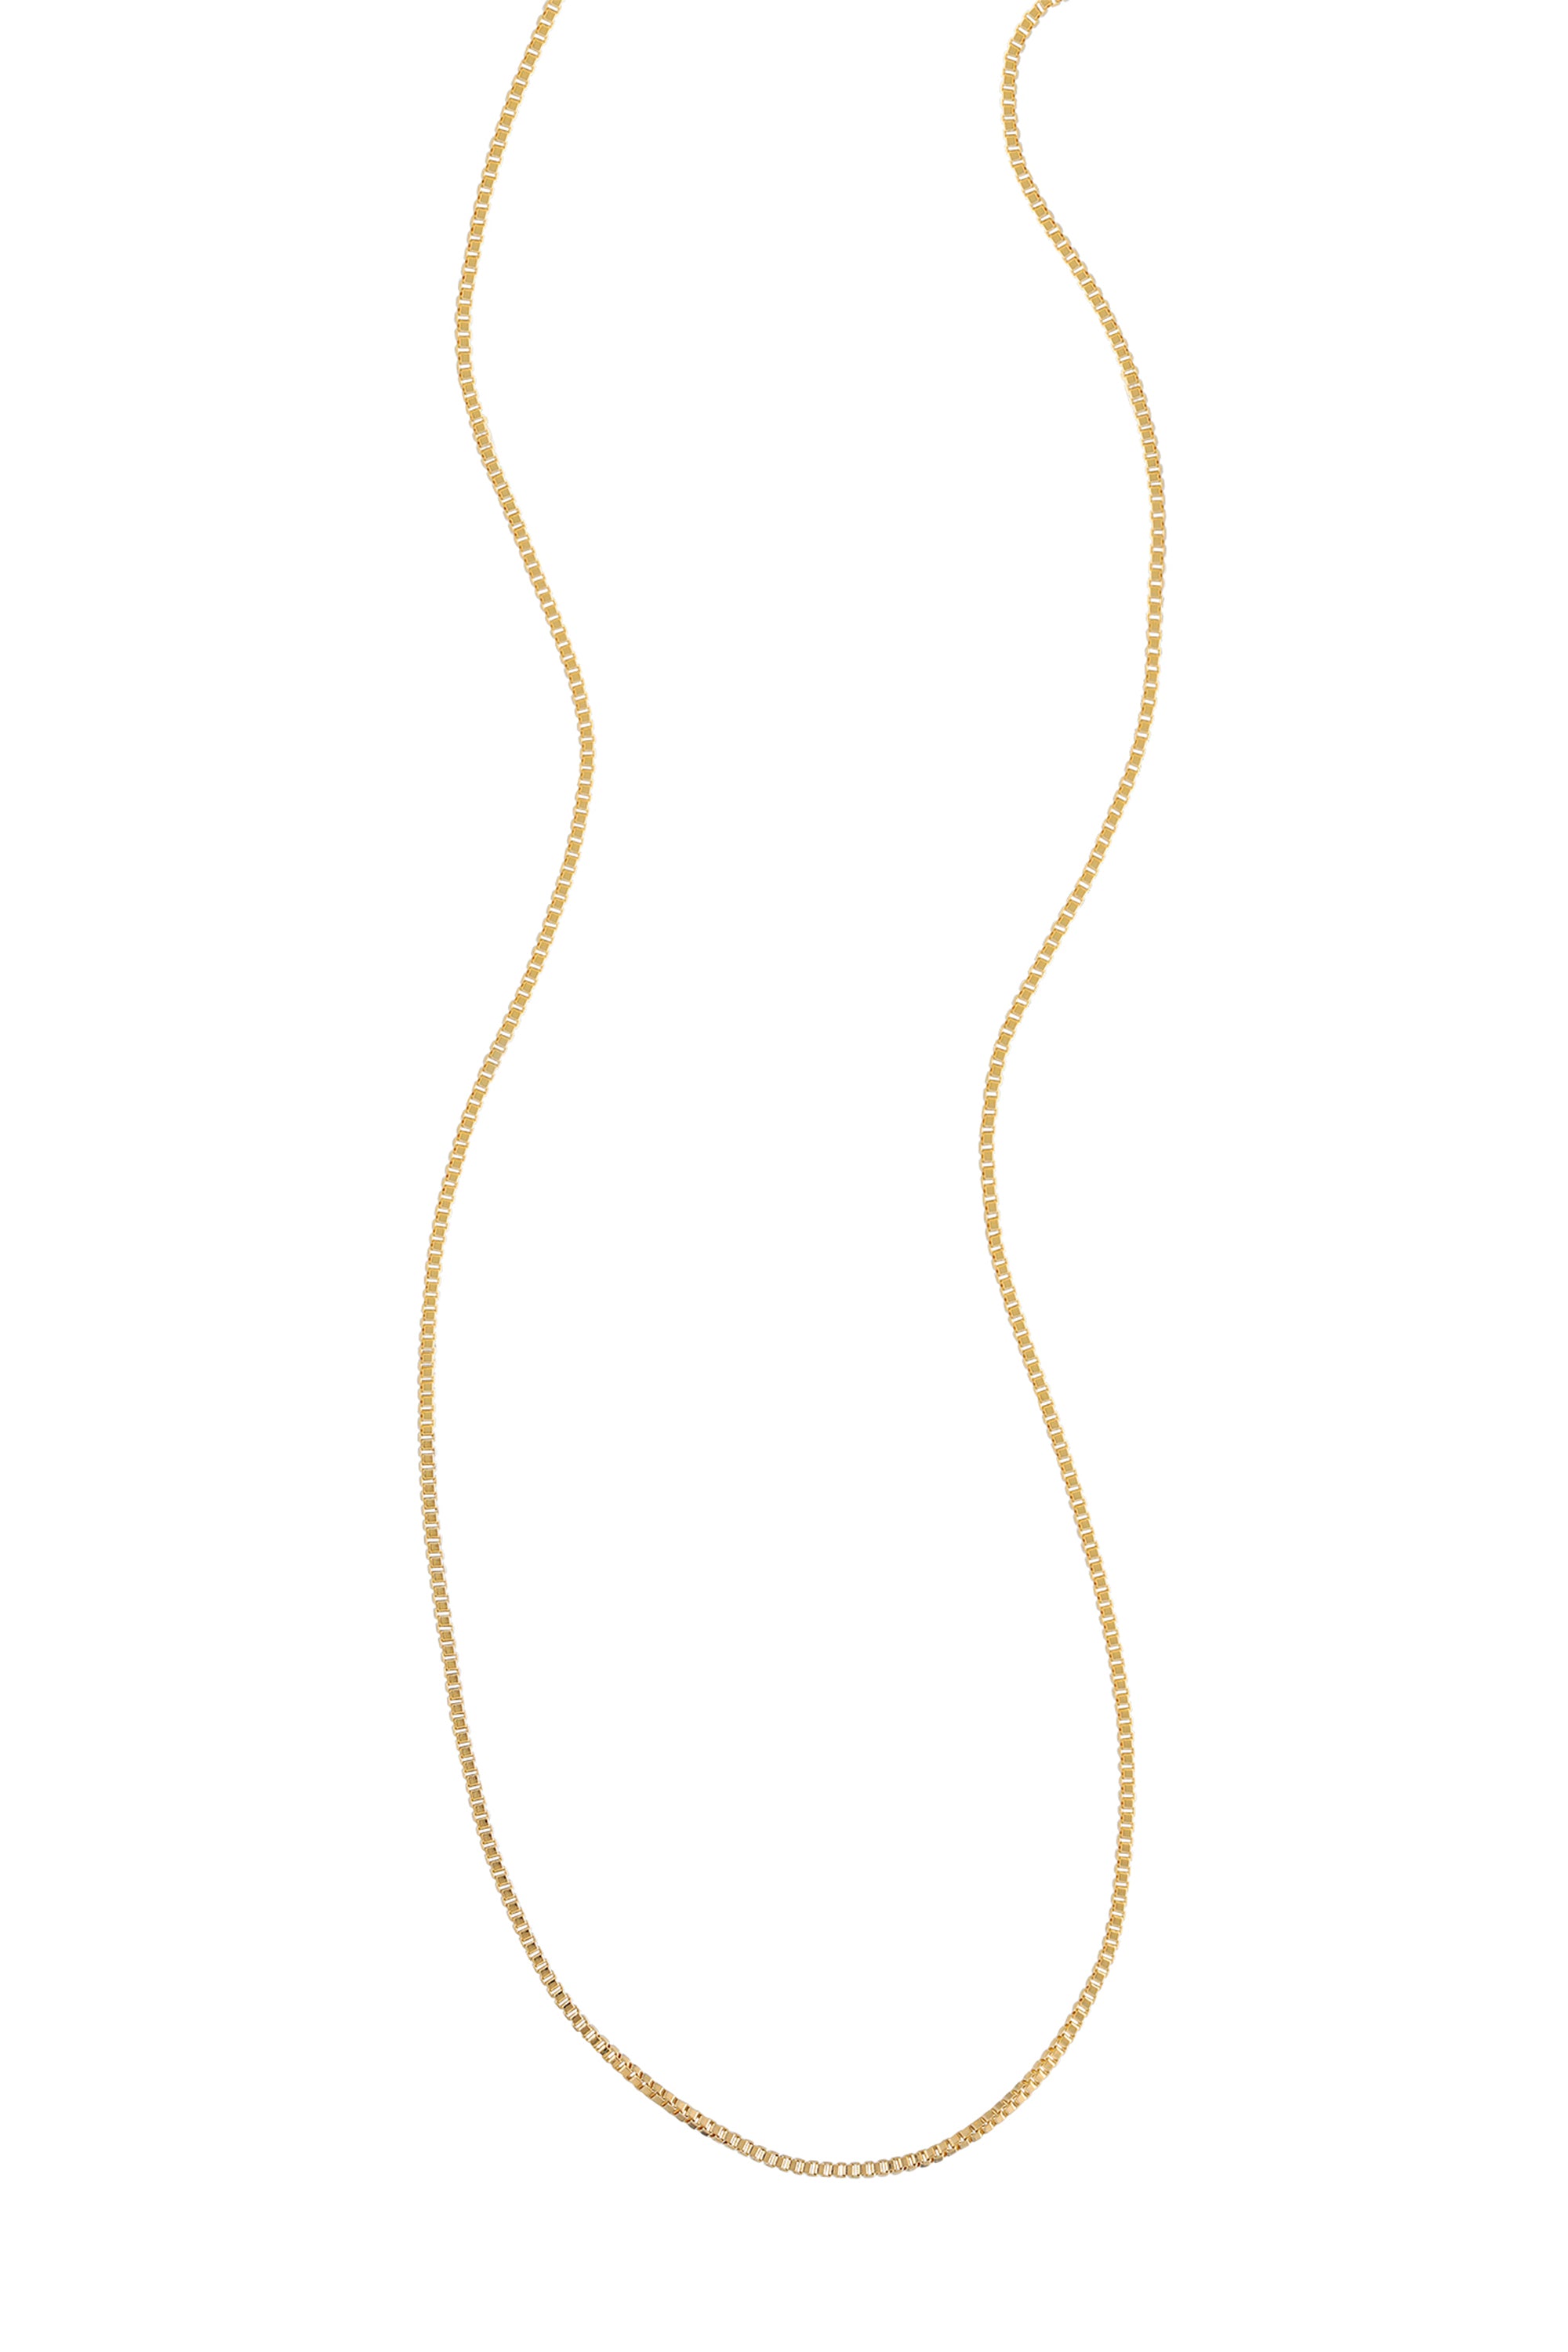 The Everyday Box Chain Necklace - 14k Gold Filled